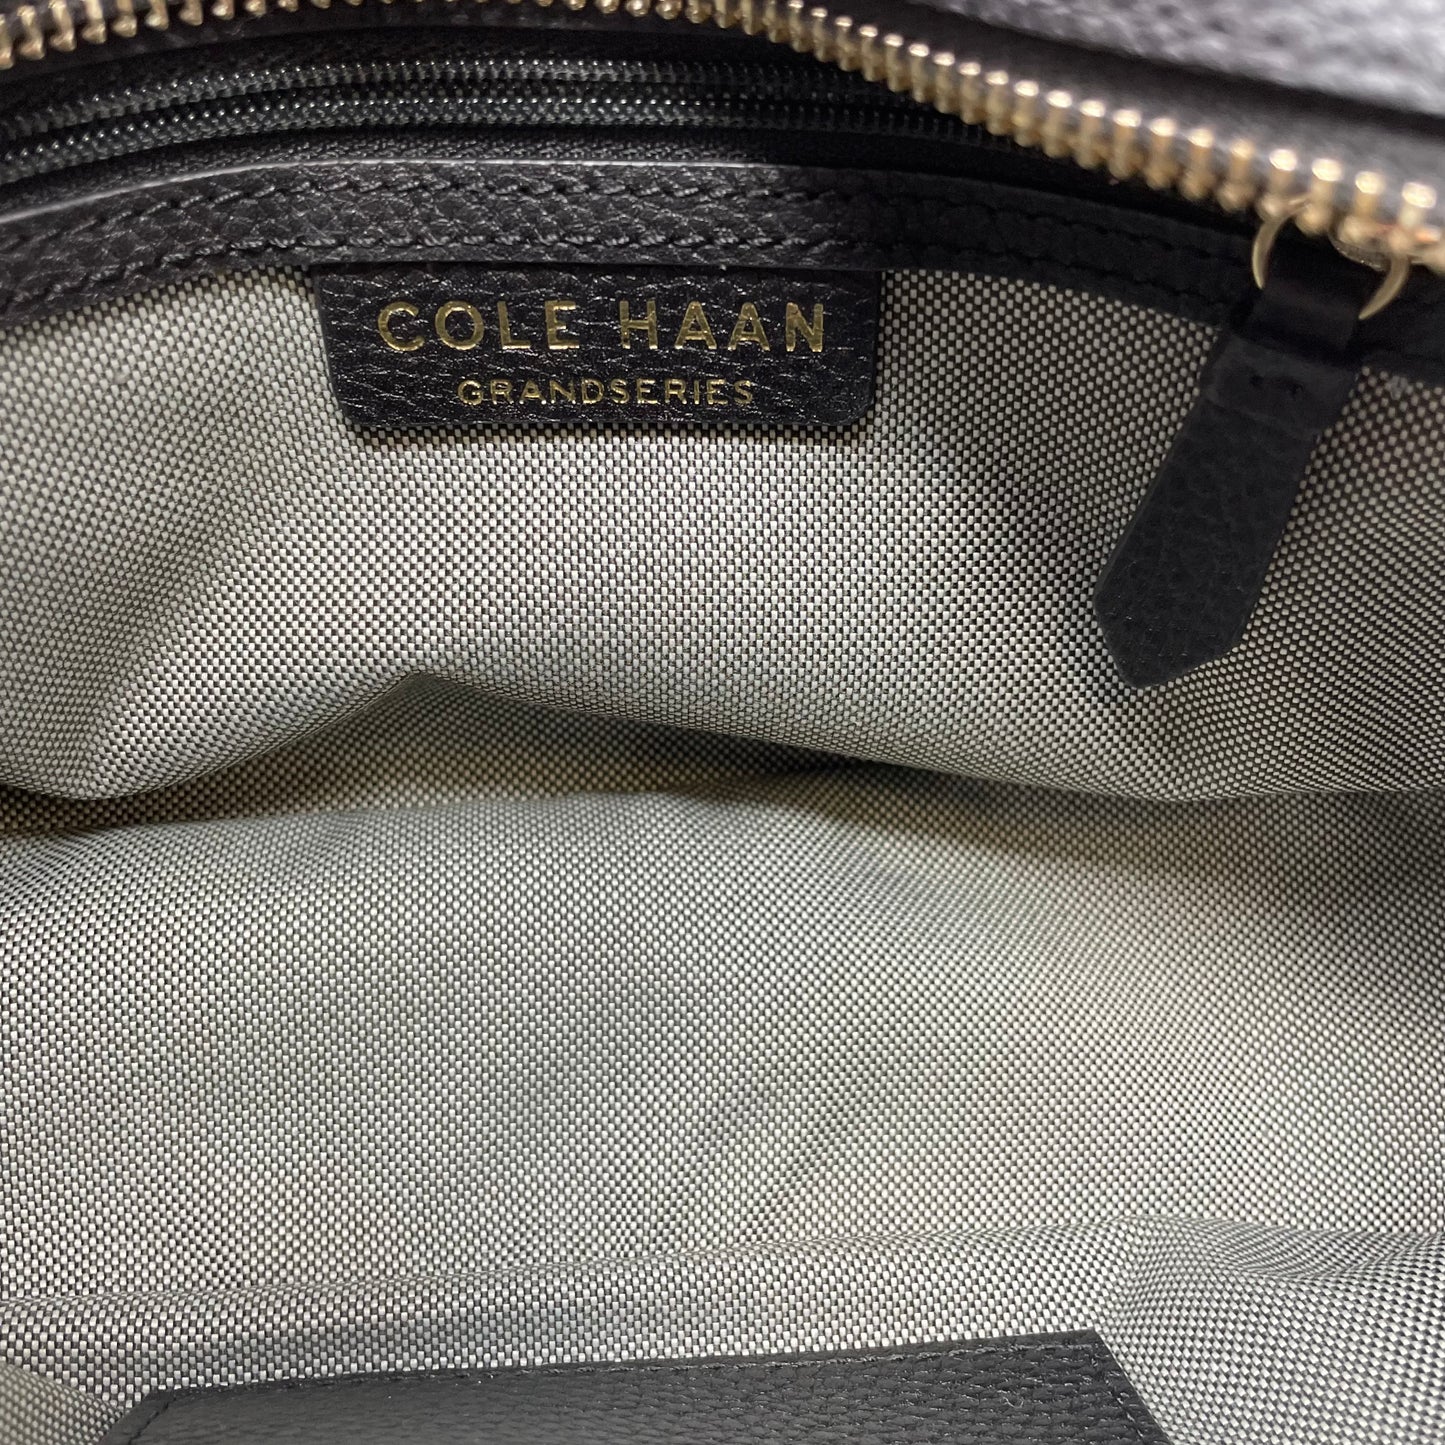 Handbag Leather By Cole-haan  Size: Small